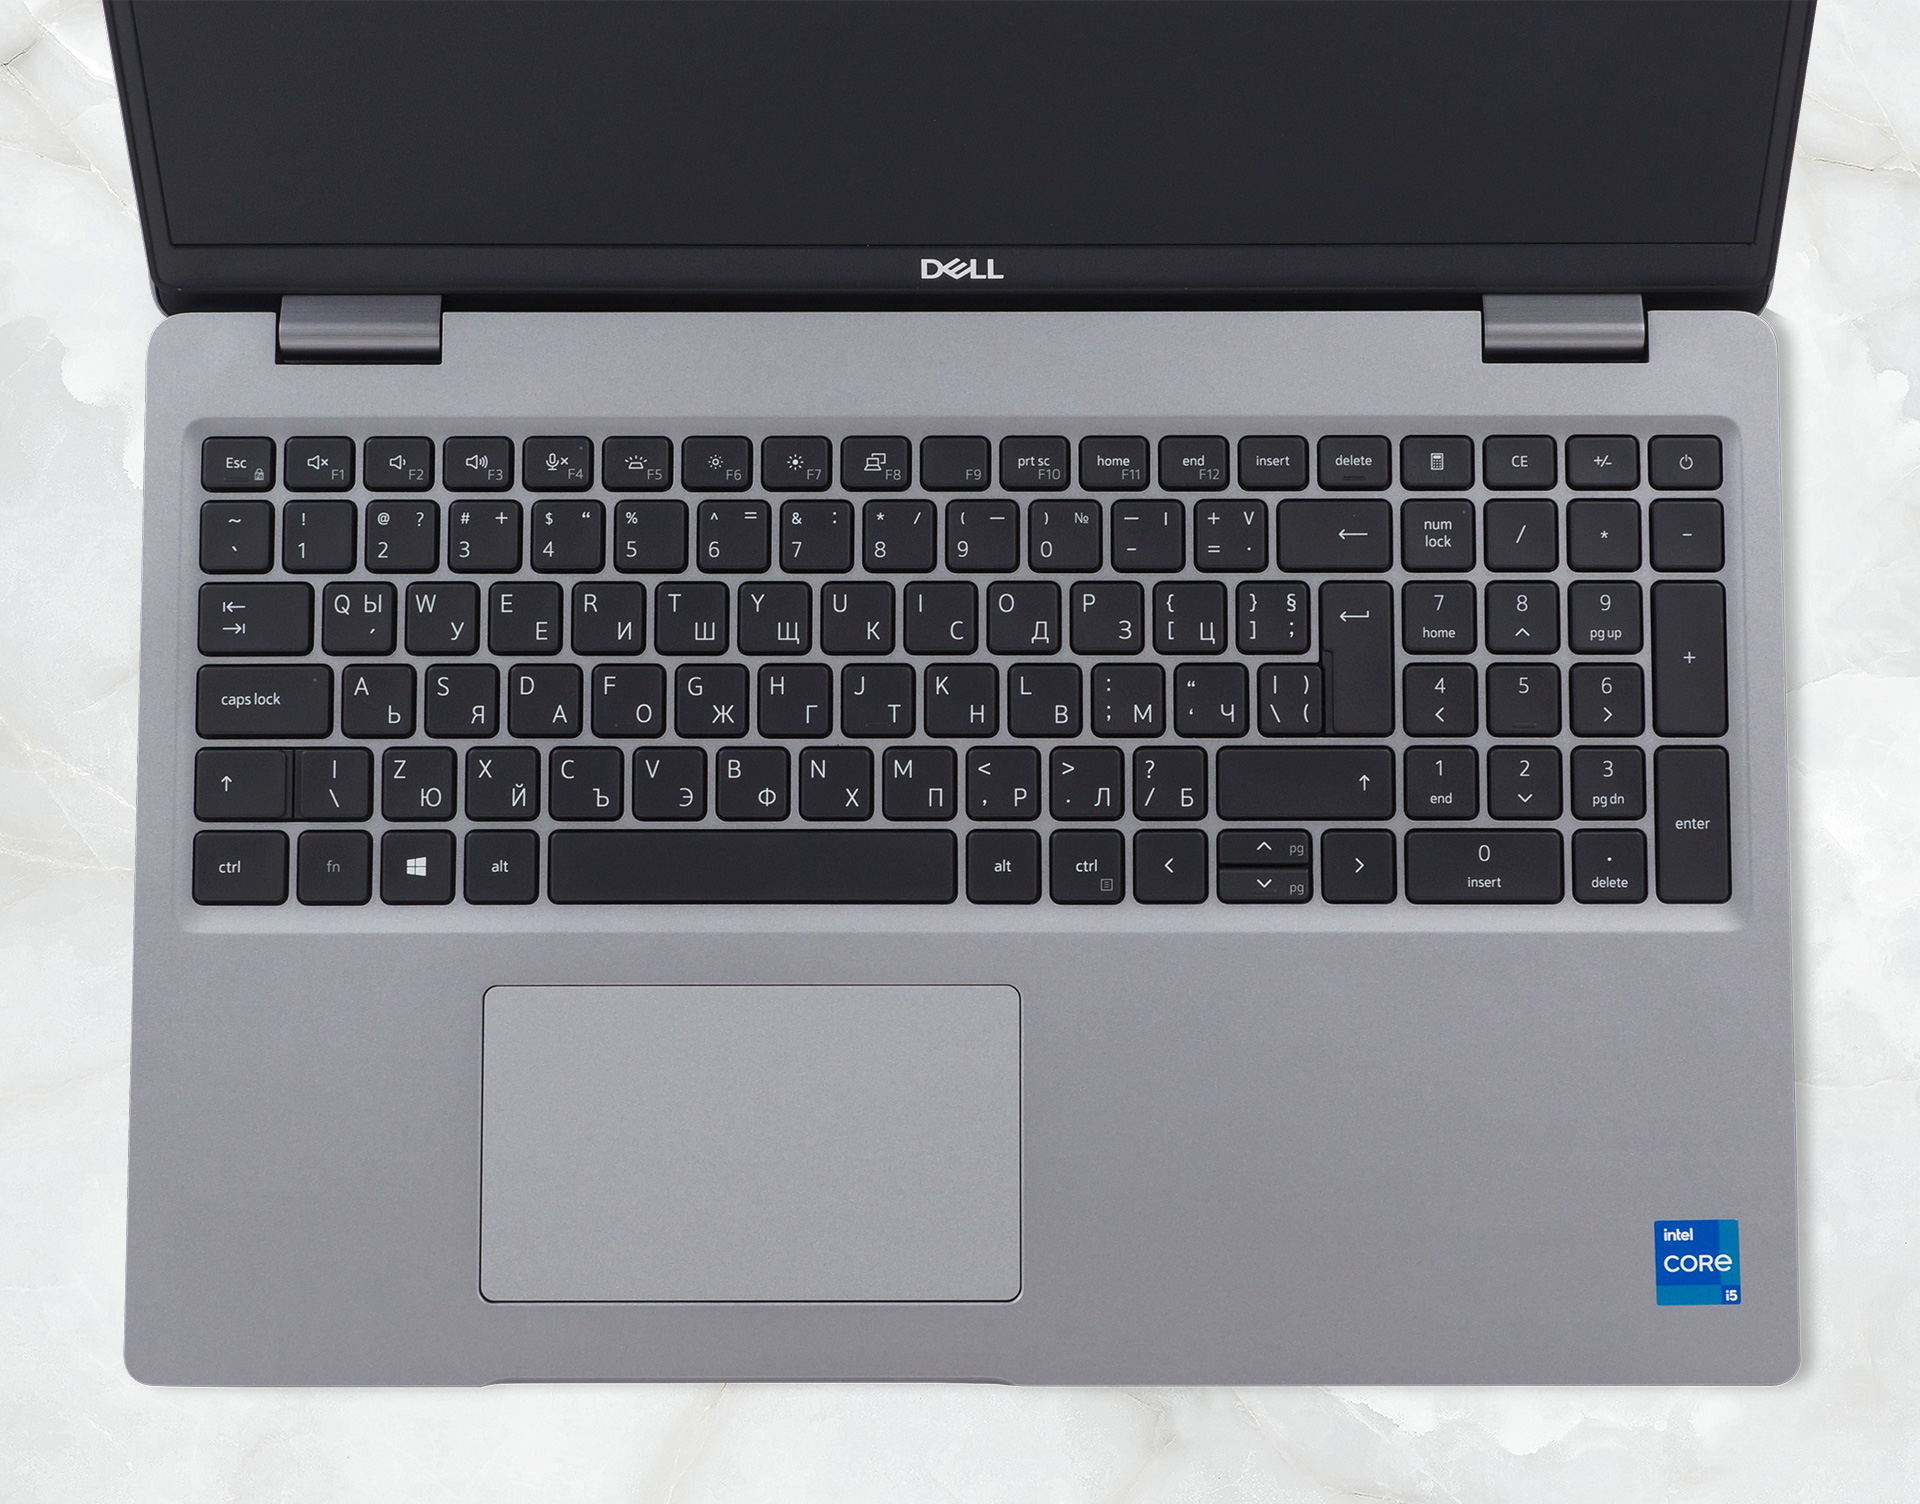 Dell Latitude 15 5521 review - boring but quite powerful 